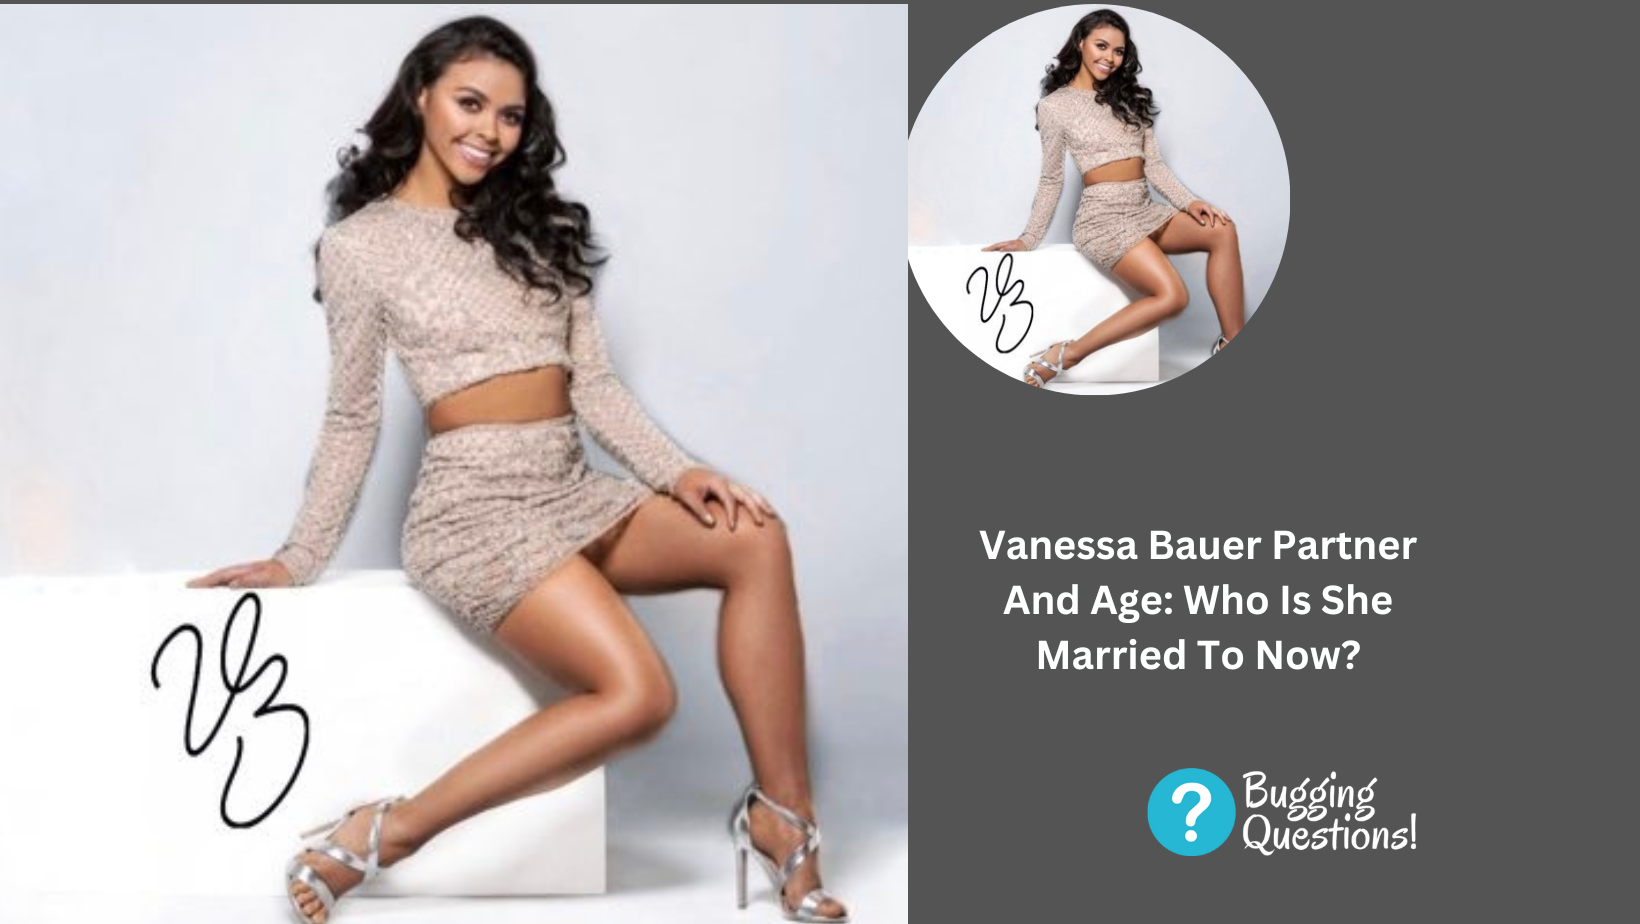 Vanessa Bauer Partner And Age: Who Is She Married To Now?